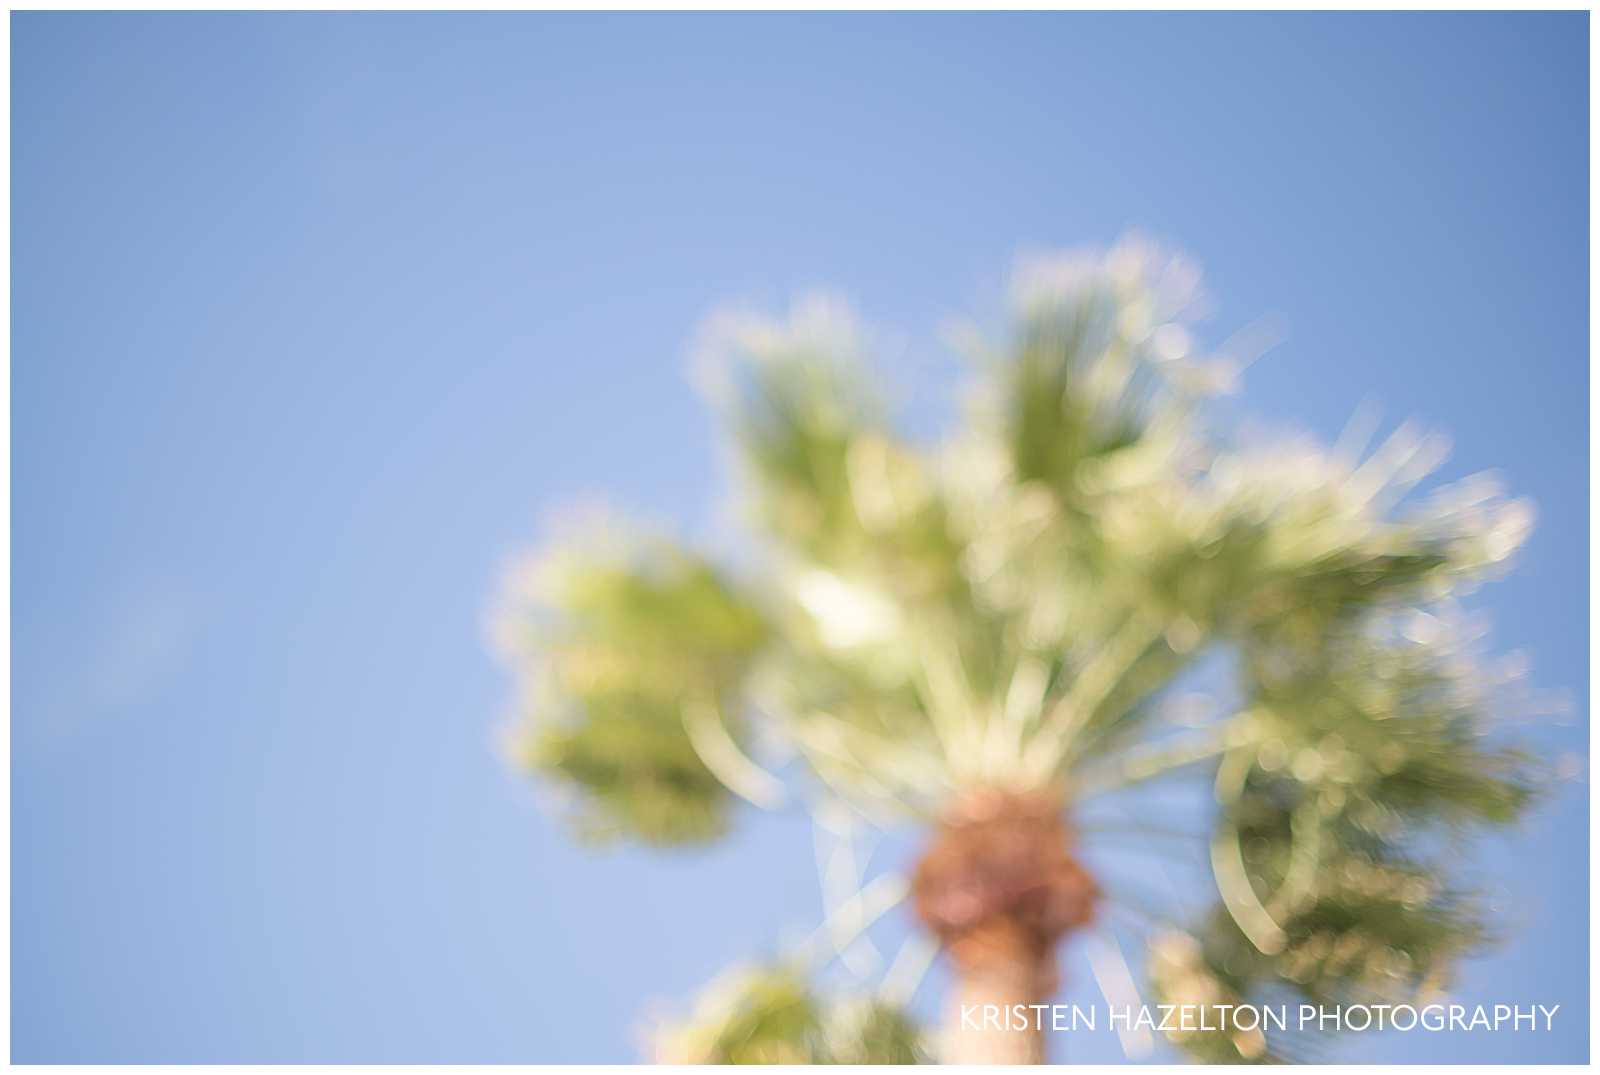 out of focus palm tree